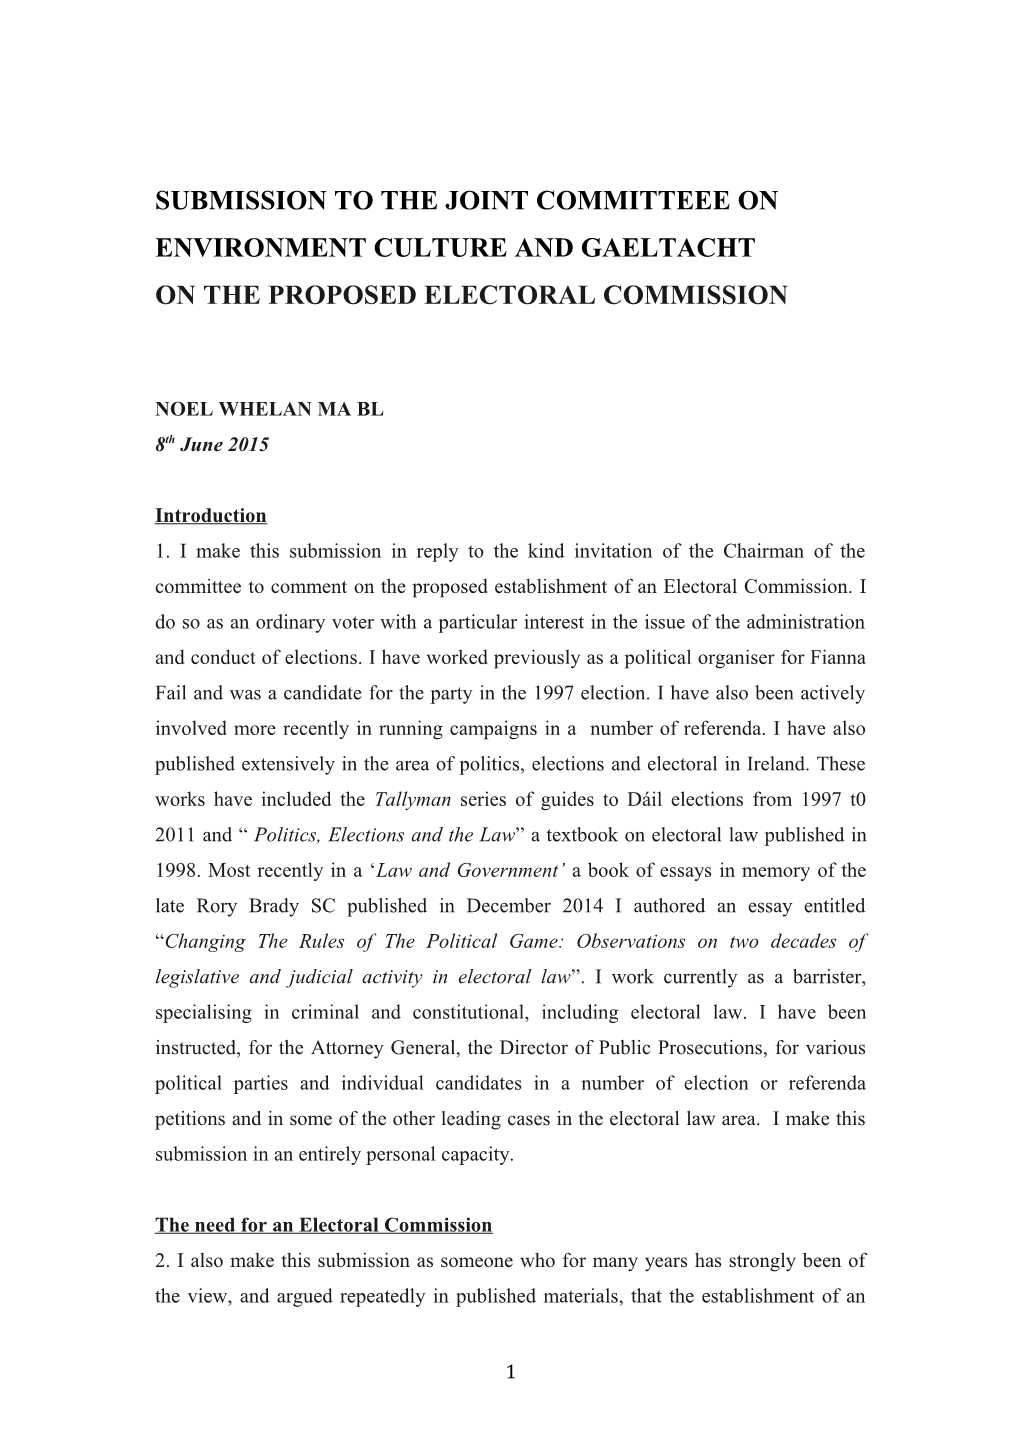 Submission to the Joint Committeee on Environment Culture and Gaeltacht